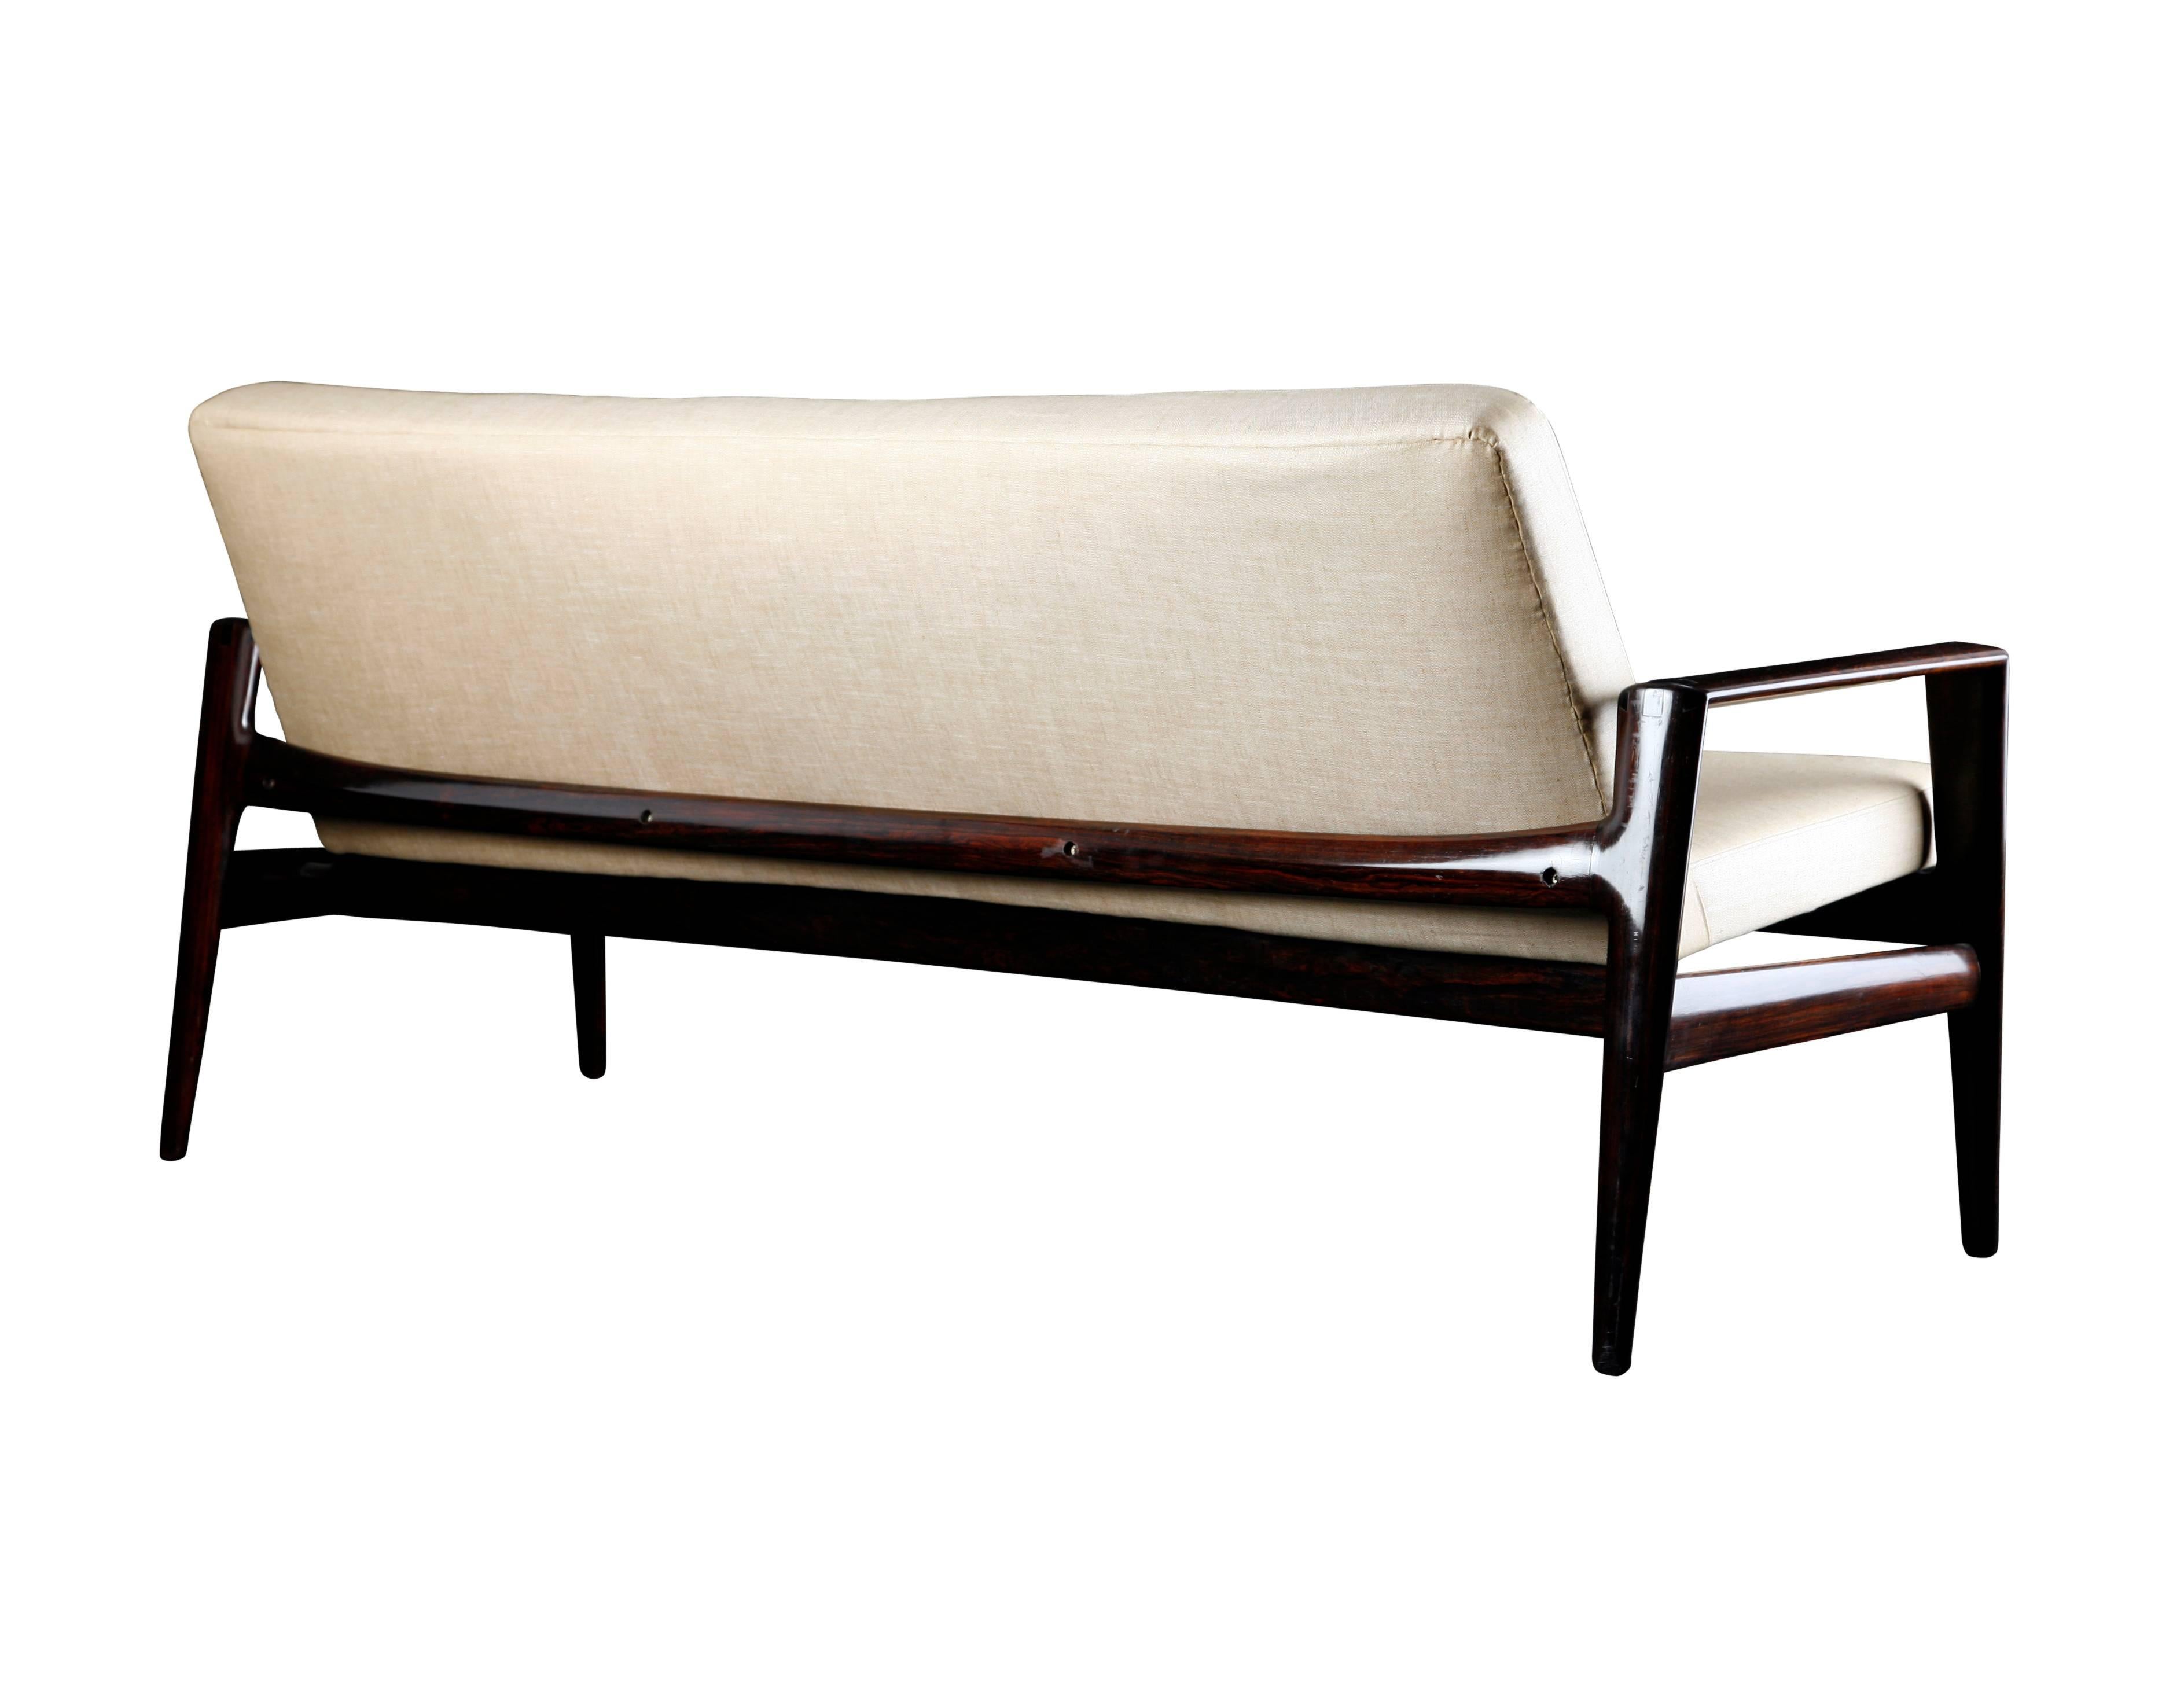 Stunning Italian sofa manufactured in the 1950s in Italy and attributed to Ico & Luisa Parisi. Frame made of solid rosewood, very elegant shape. New cover made of linen fabrics. Beautiful workmanship and very high quality!